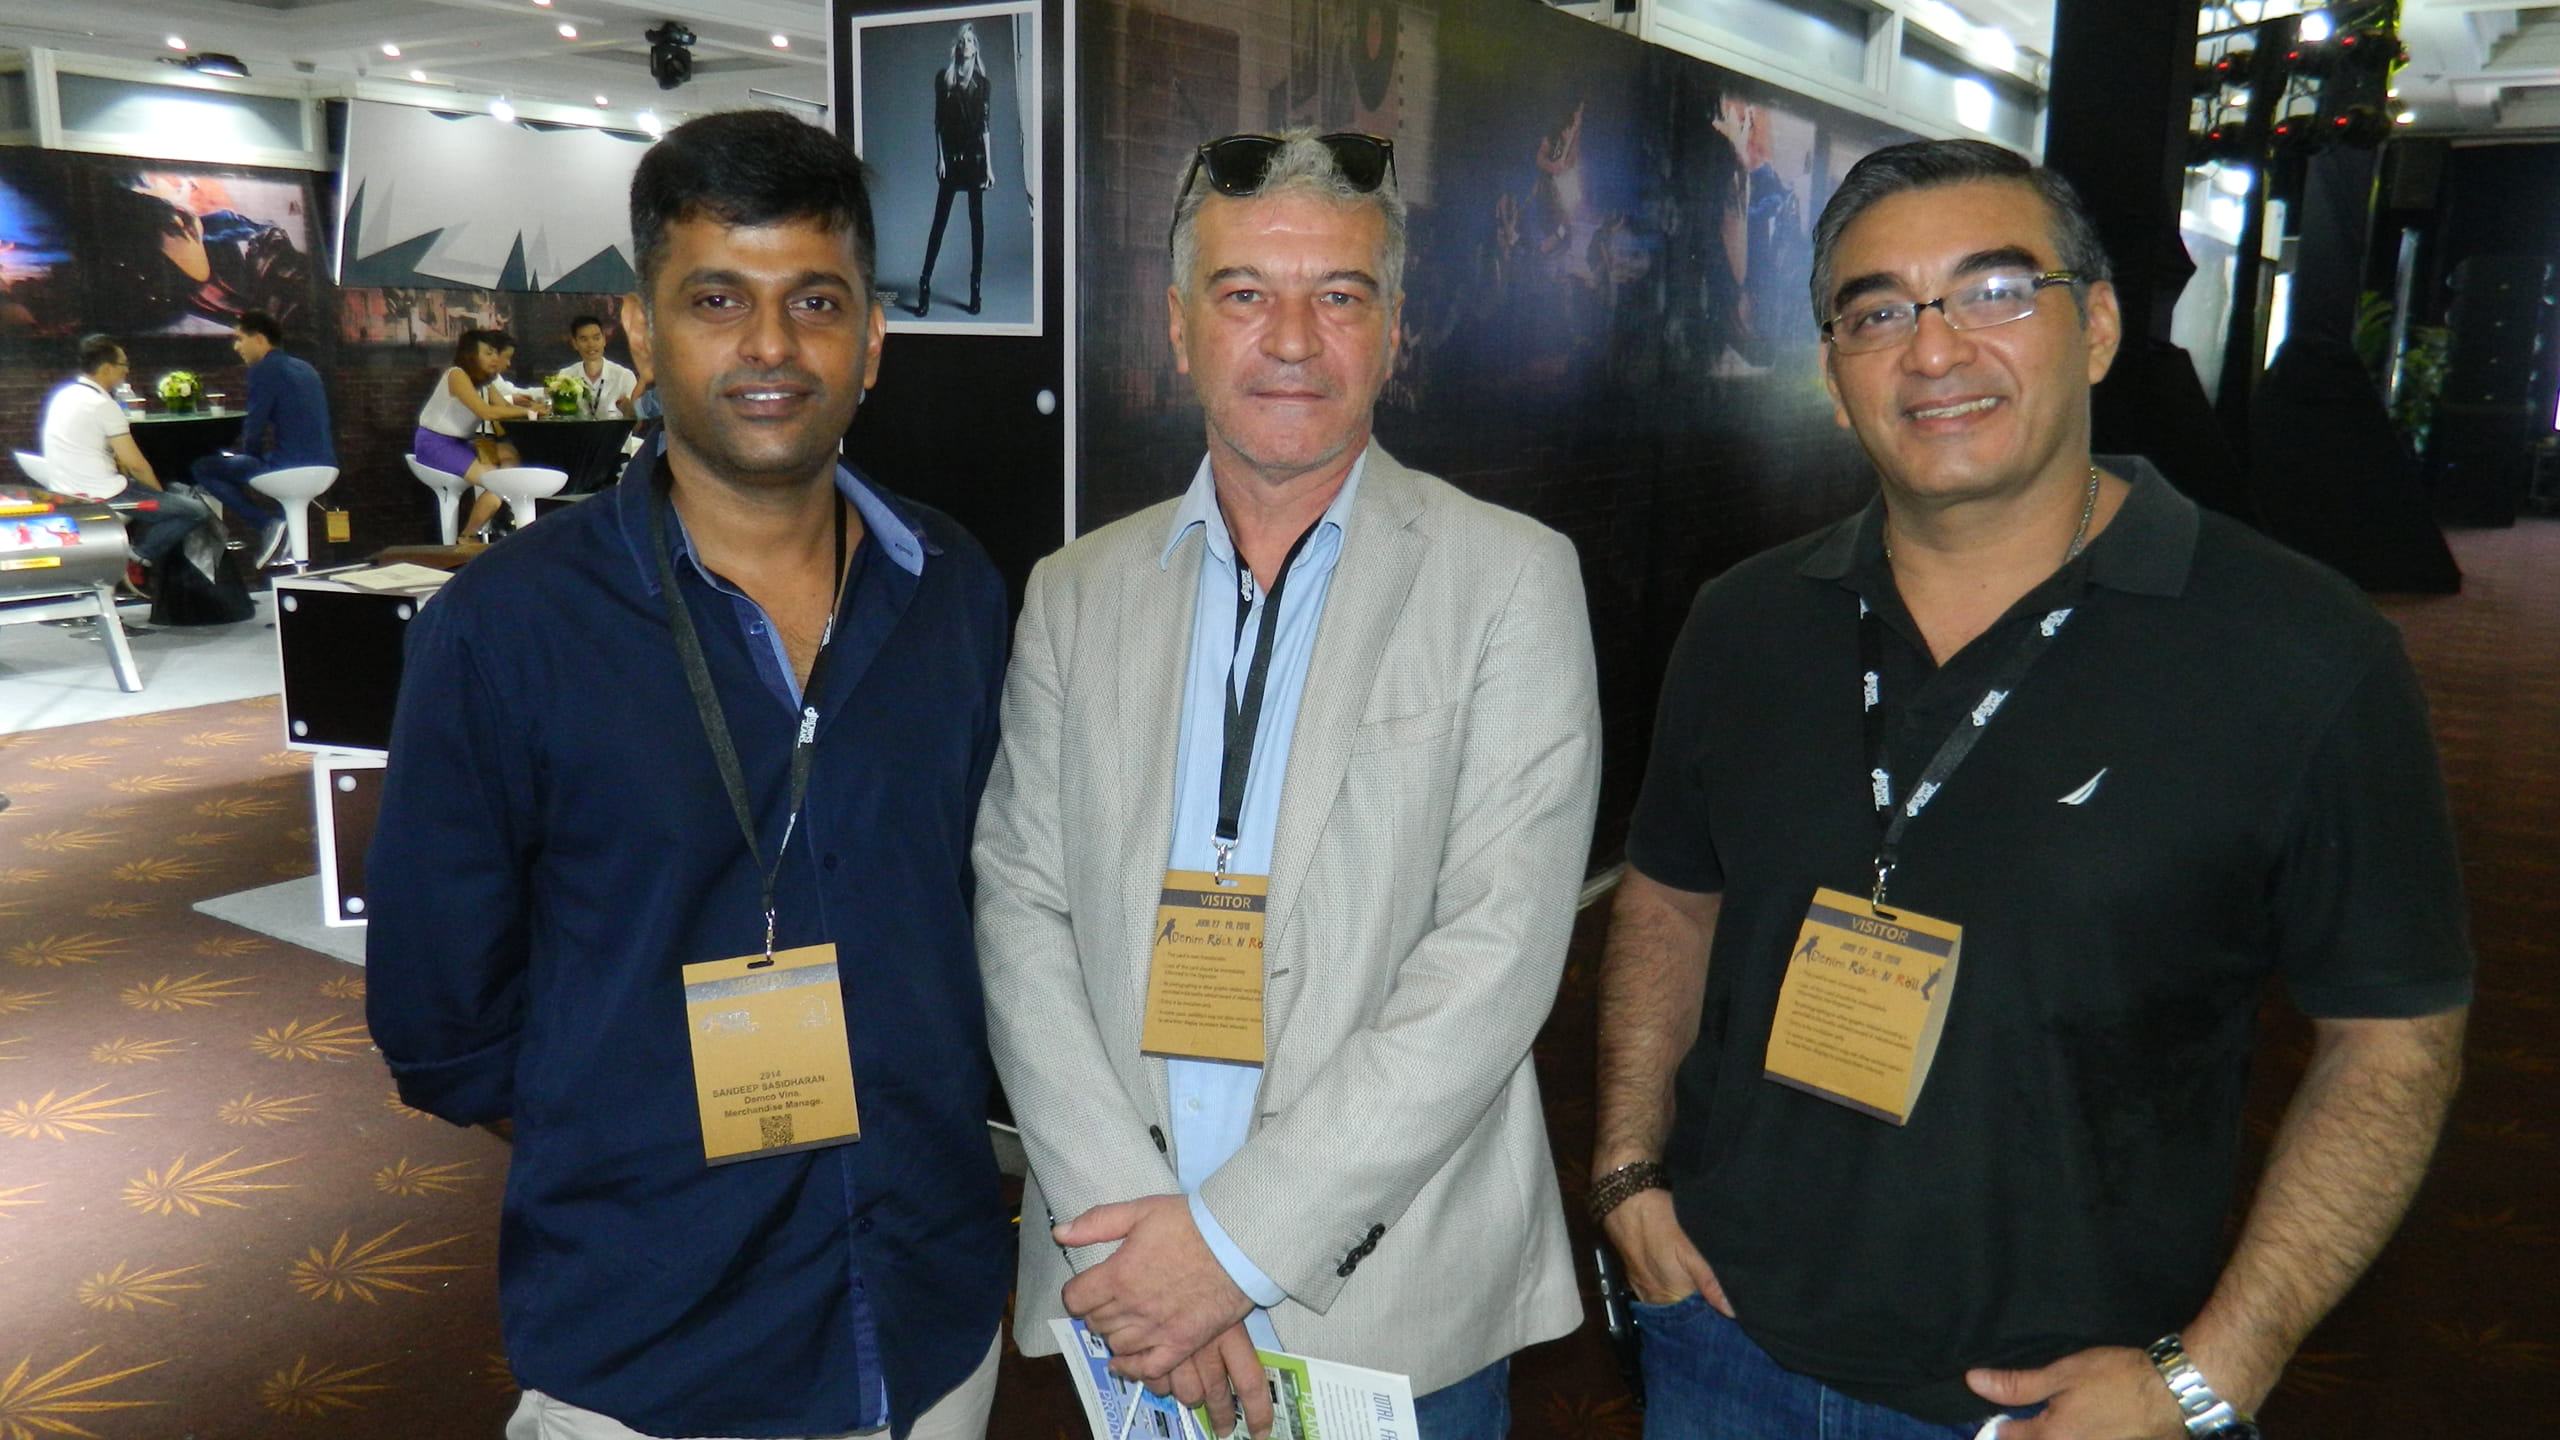 Franco De Faccio, Factory Managing Director, Demco Vina (C) with Sandeep Sasidharan, Merchandise Manager (L) and David Soberanis, Laundry Manager (R)